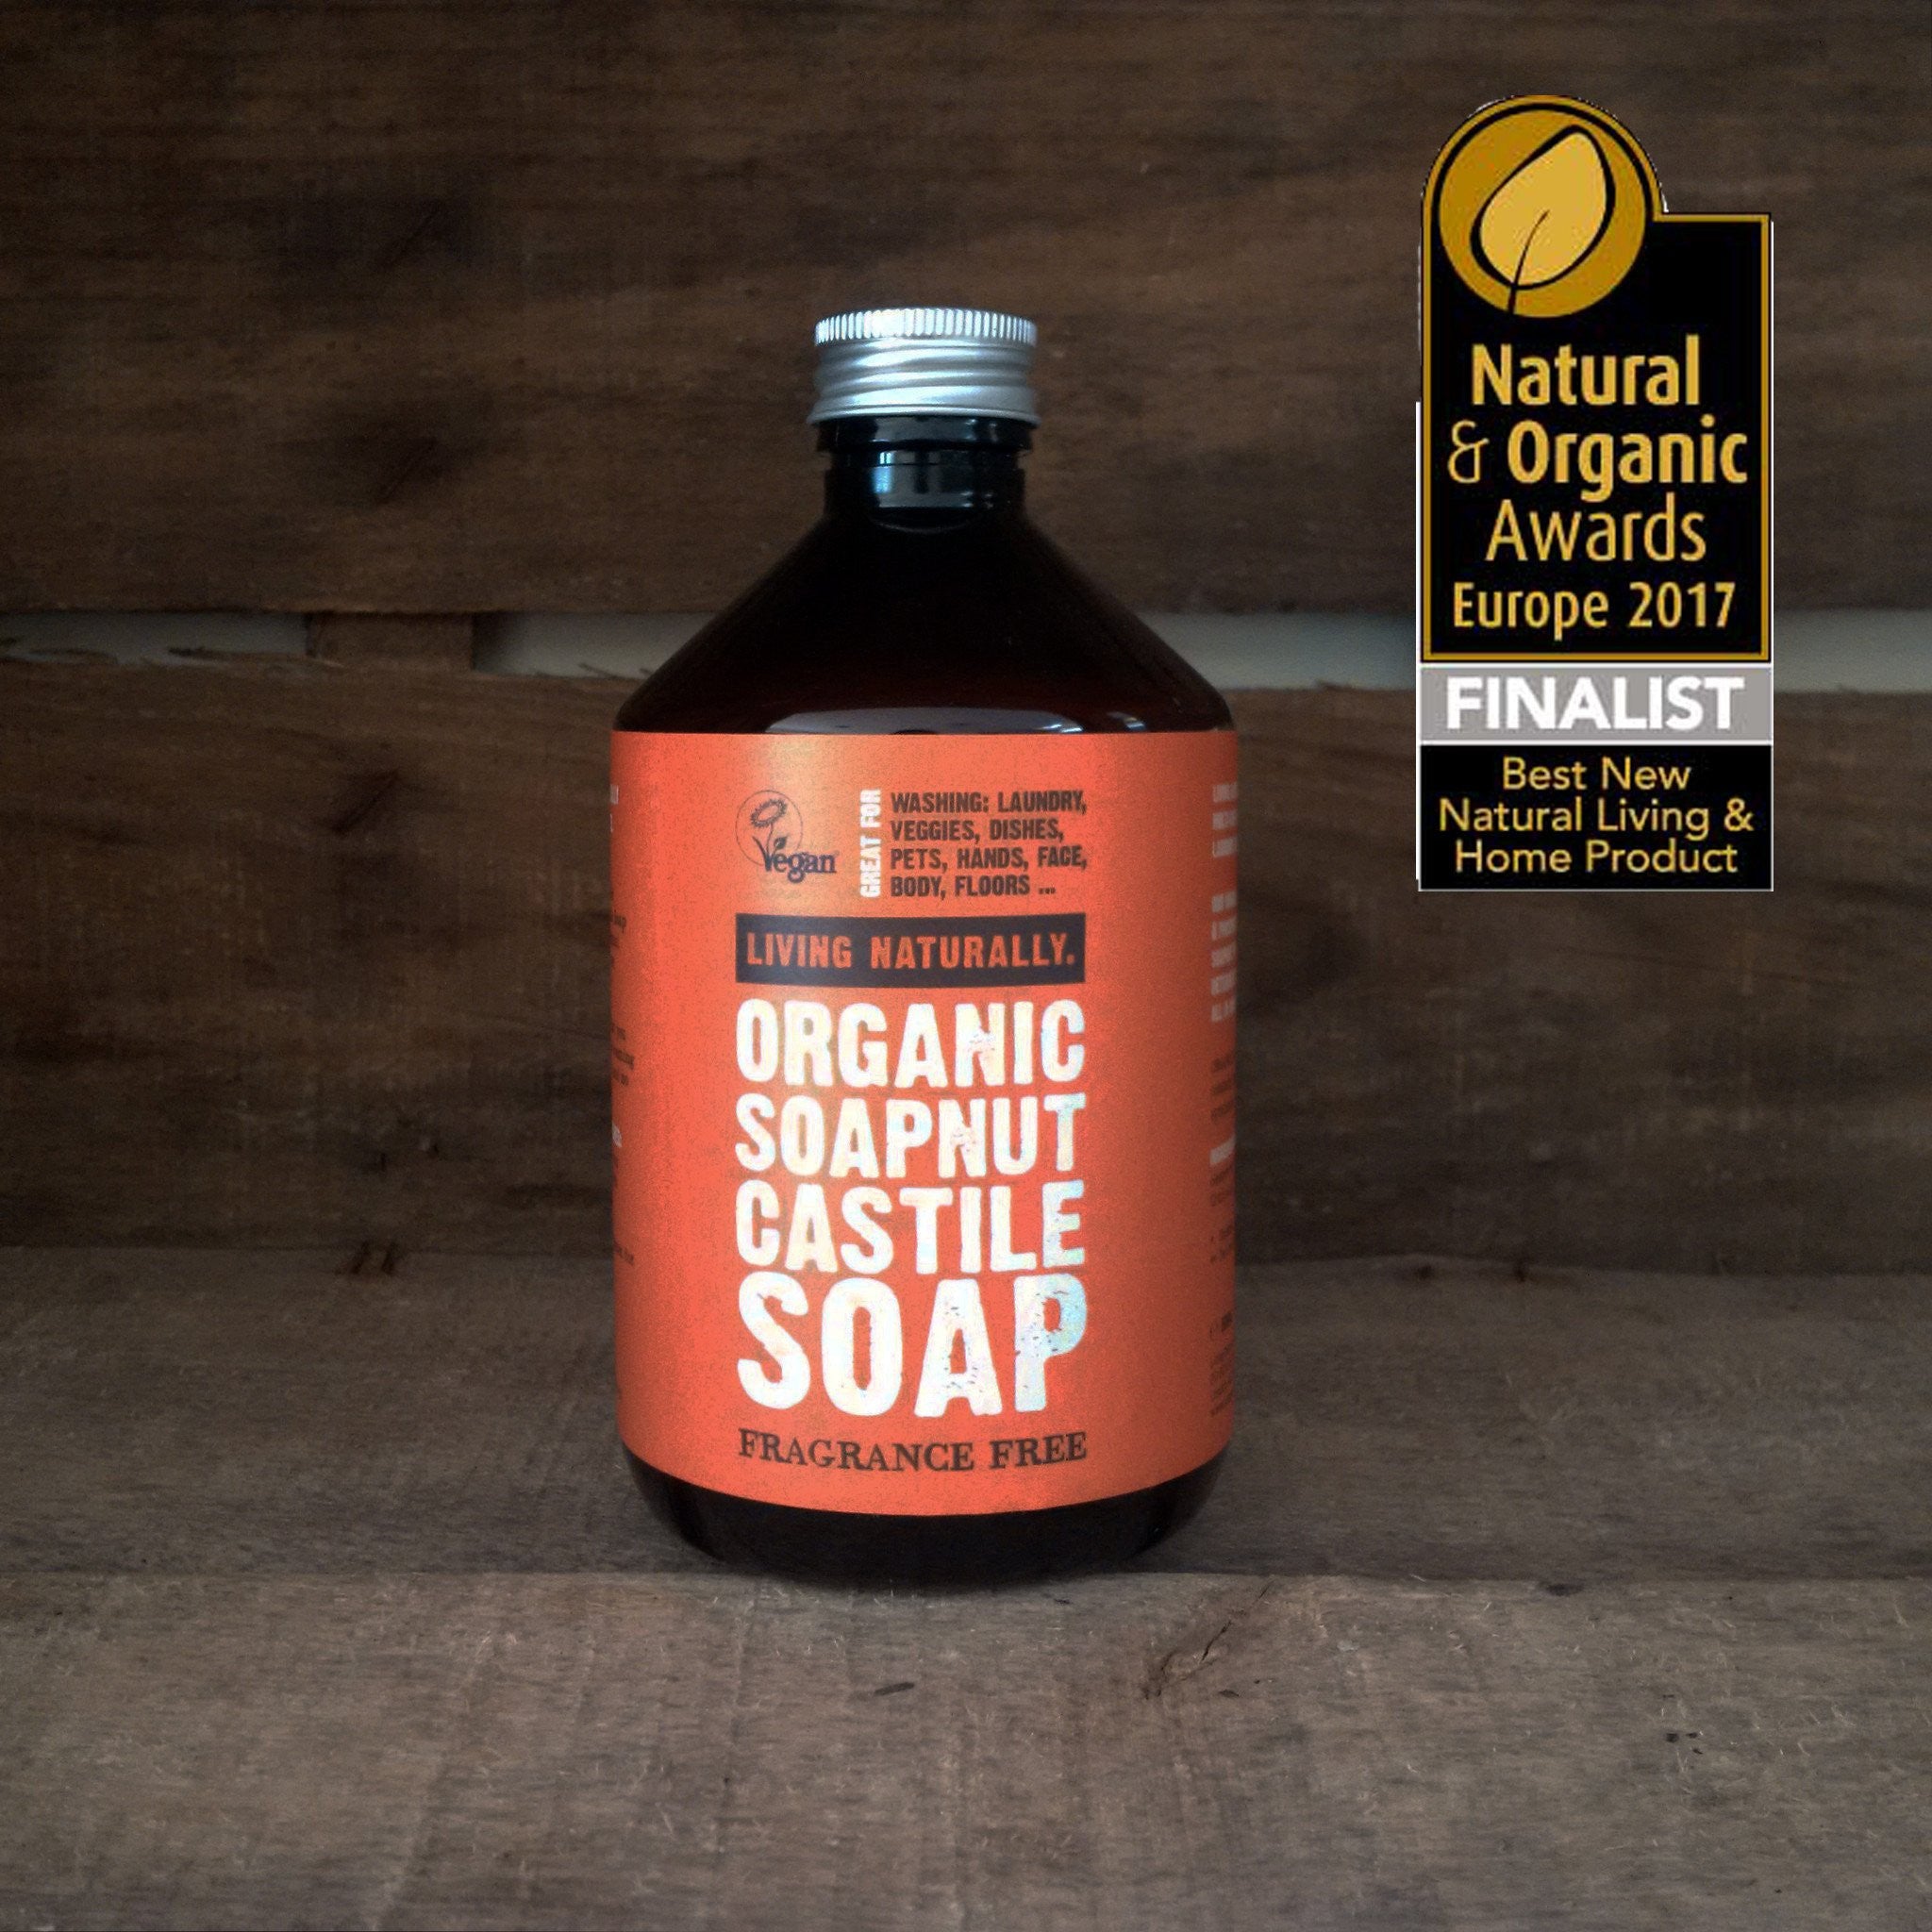 Our Brand New Organic Soapnut Castile Soap Wins Award at Natural Organic Product Europe 2017